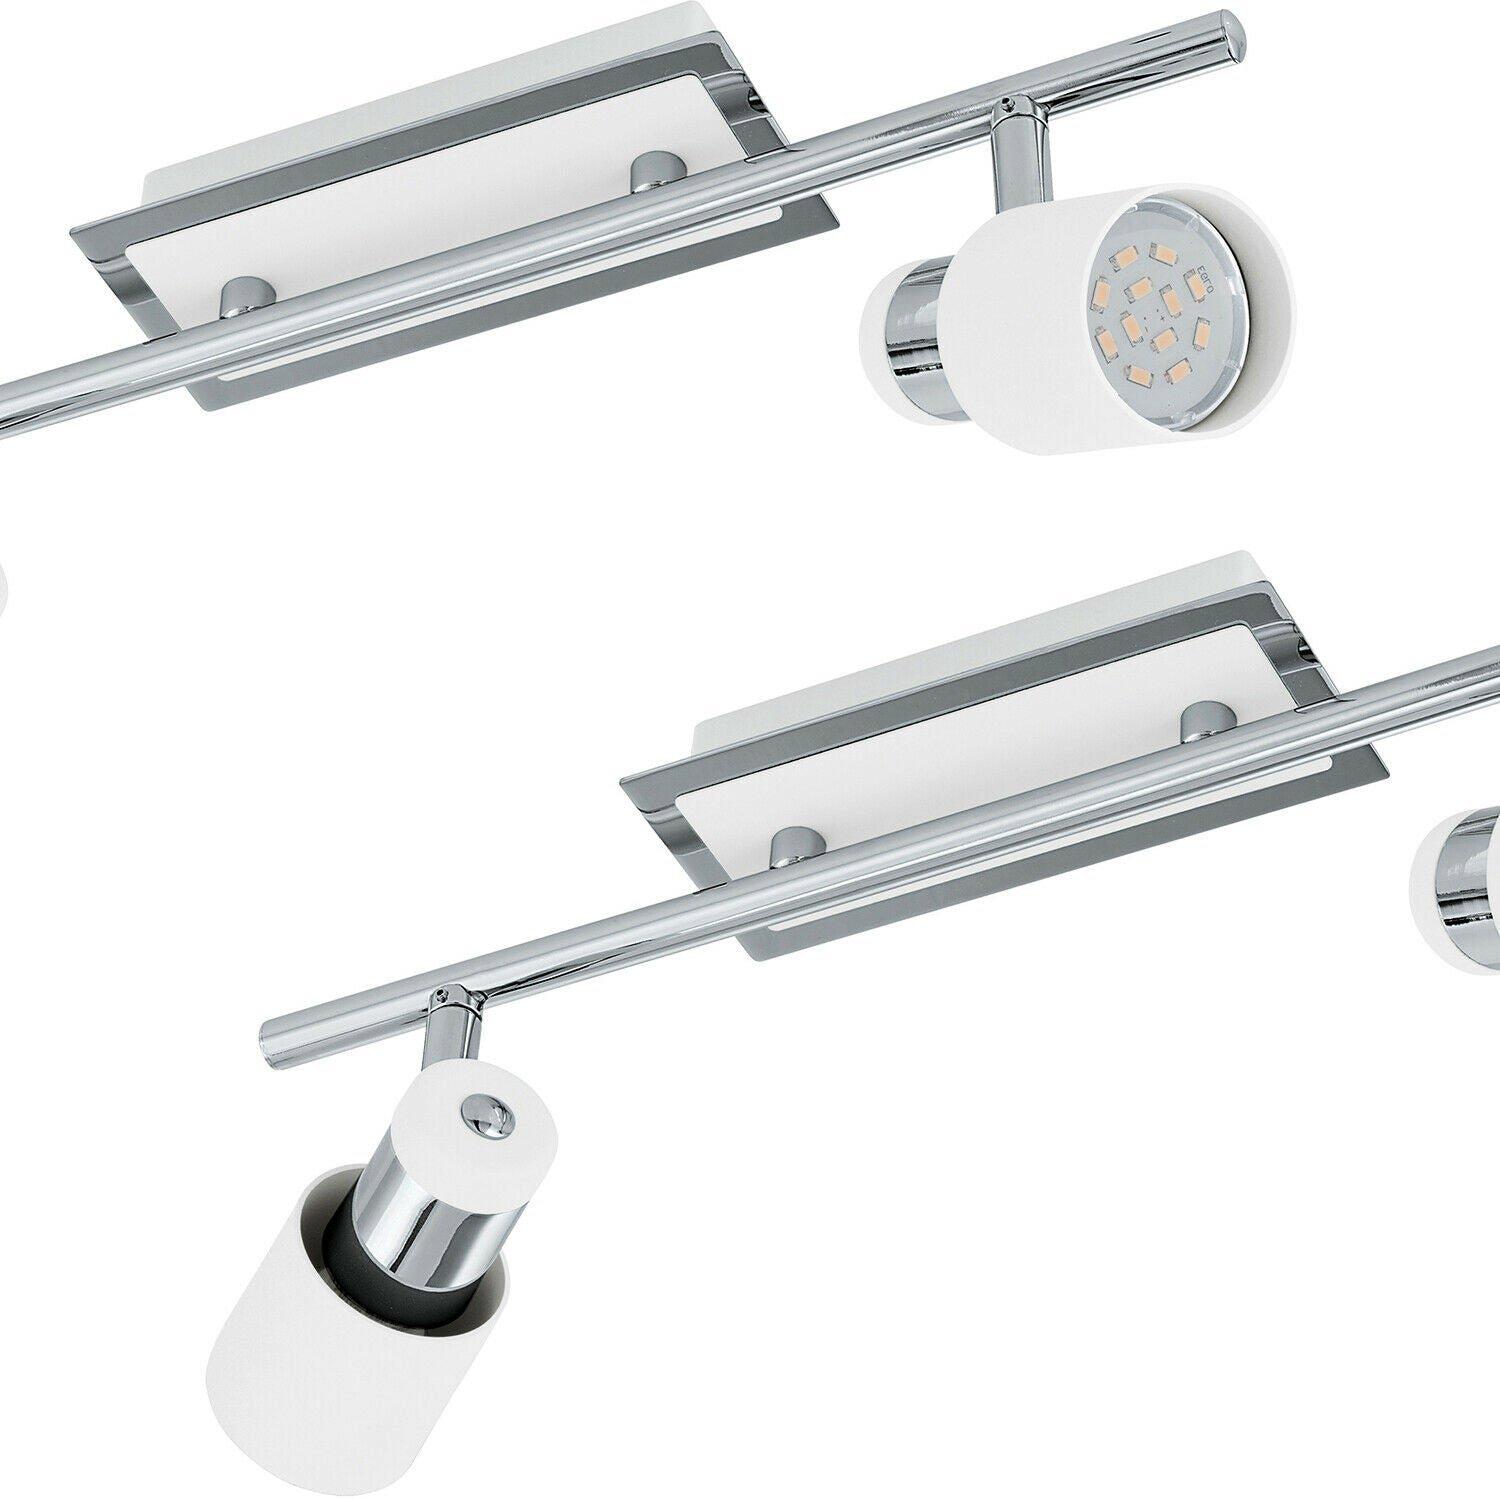 2 PACK Wall 2 Spot Light Colour Chrome Plated White Steel GU10 2x5W Included